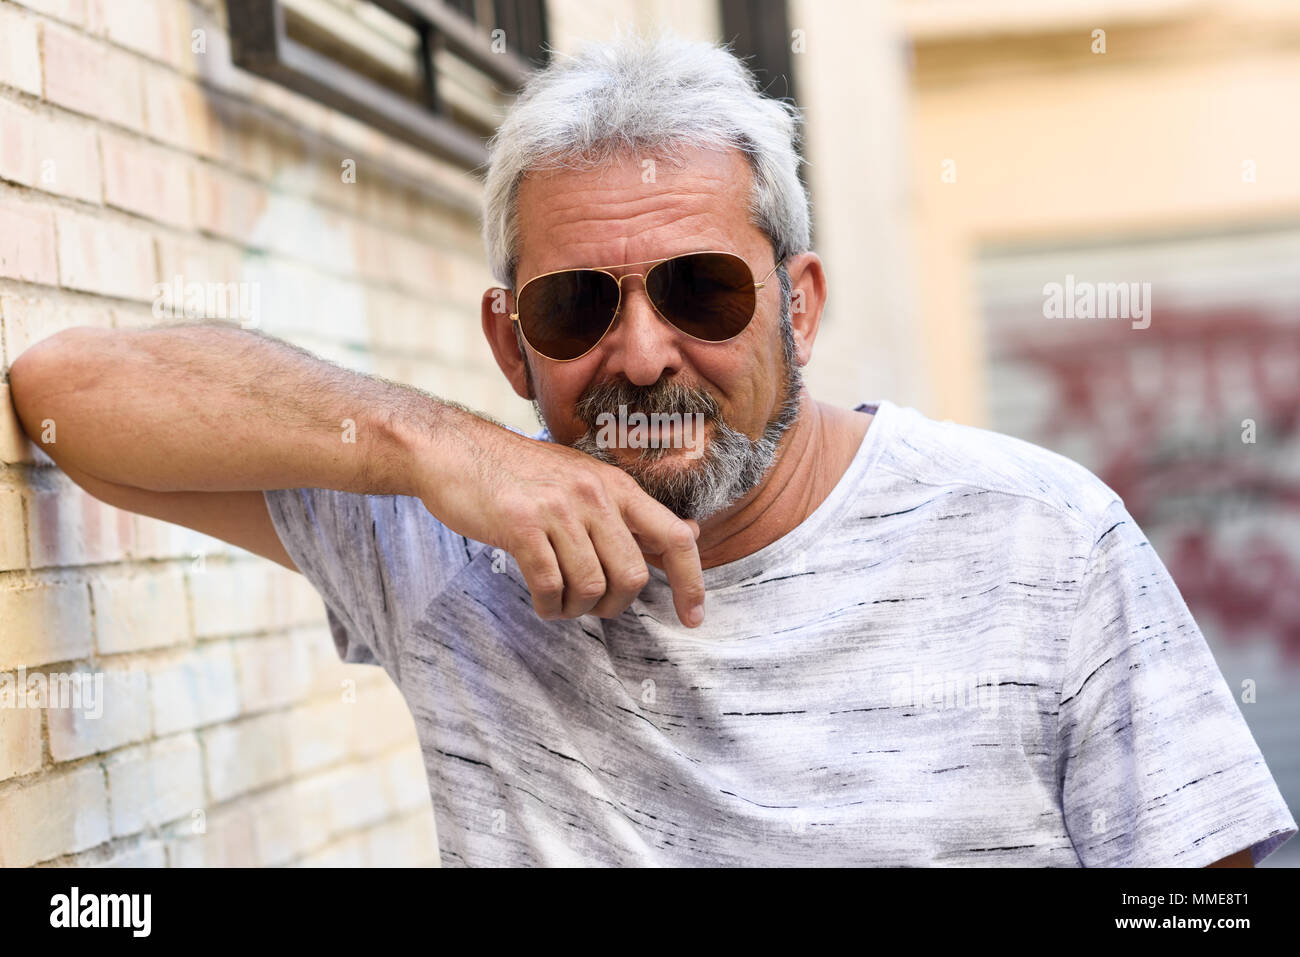 https://c8.alamy.com/comp/MME8T1/mature-man-smiling-at-camera-in-urban-background-senior-male-with-white-hair-and-beard-wearing-casual-clothes-and-aviator-sunglasses-MME8T1.jpg